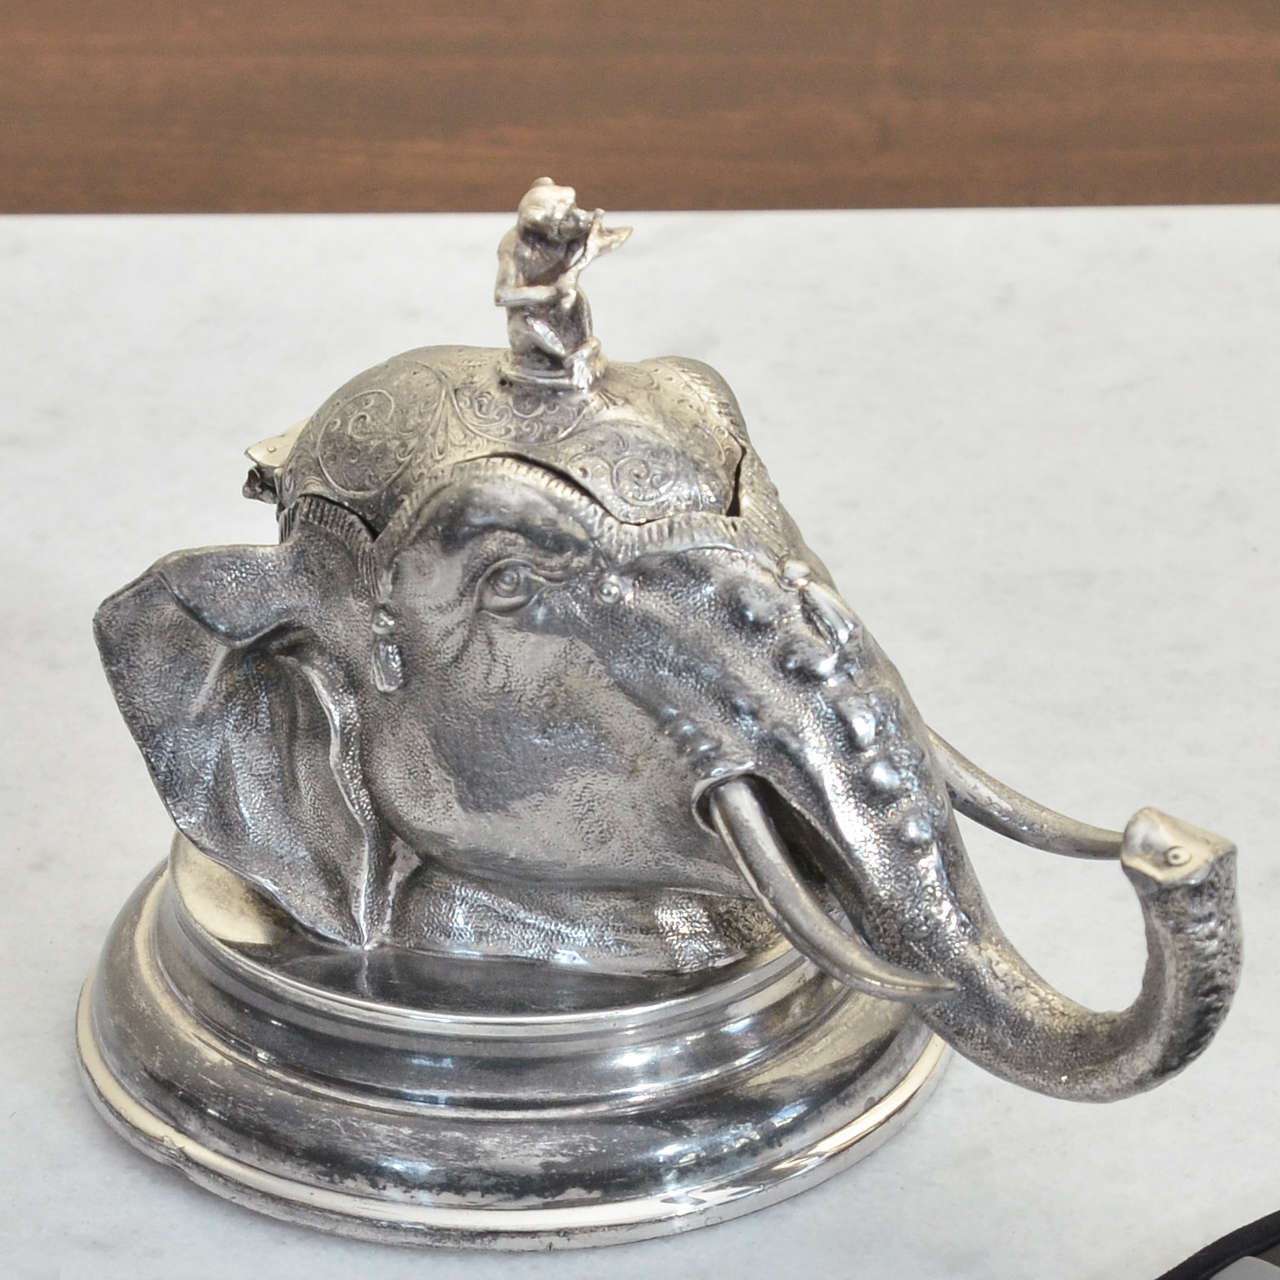 English elephant head inkwell with finial on the lid in the form of monkey playing a flute with glass insert for the ink. The inkwell is on a circular base marked L&W.S for Lee & Wigfull of Sheffield. Similar American silver plate inkwell sold at